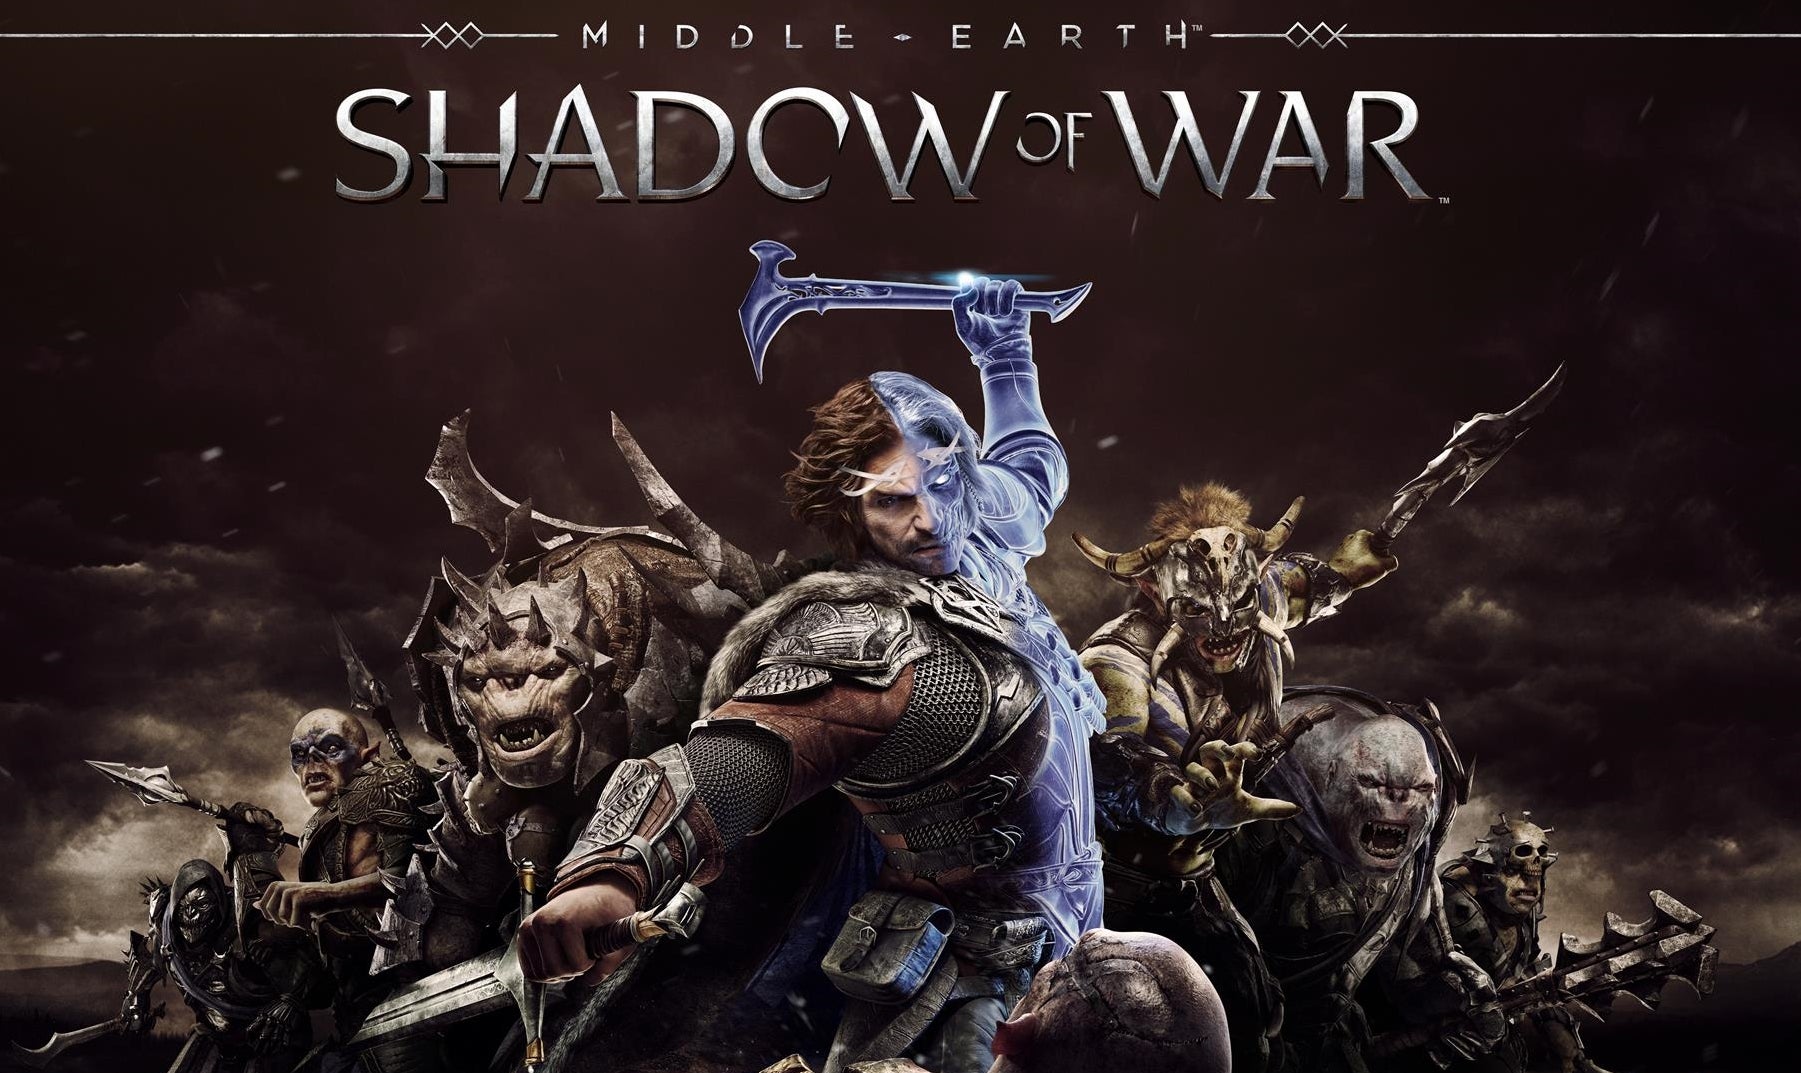 Image for Middle-earth: Shadow of War is an Xbox Play Anywhere title